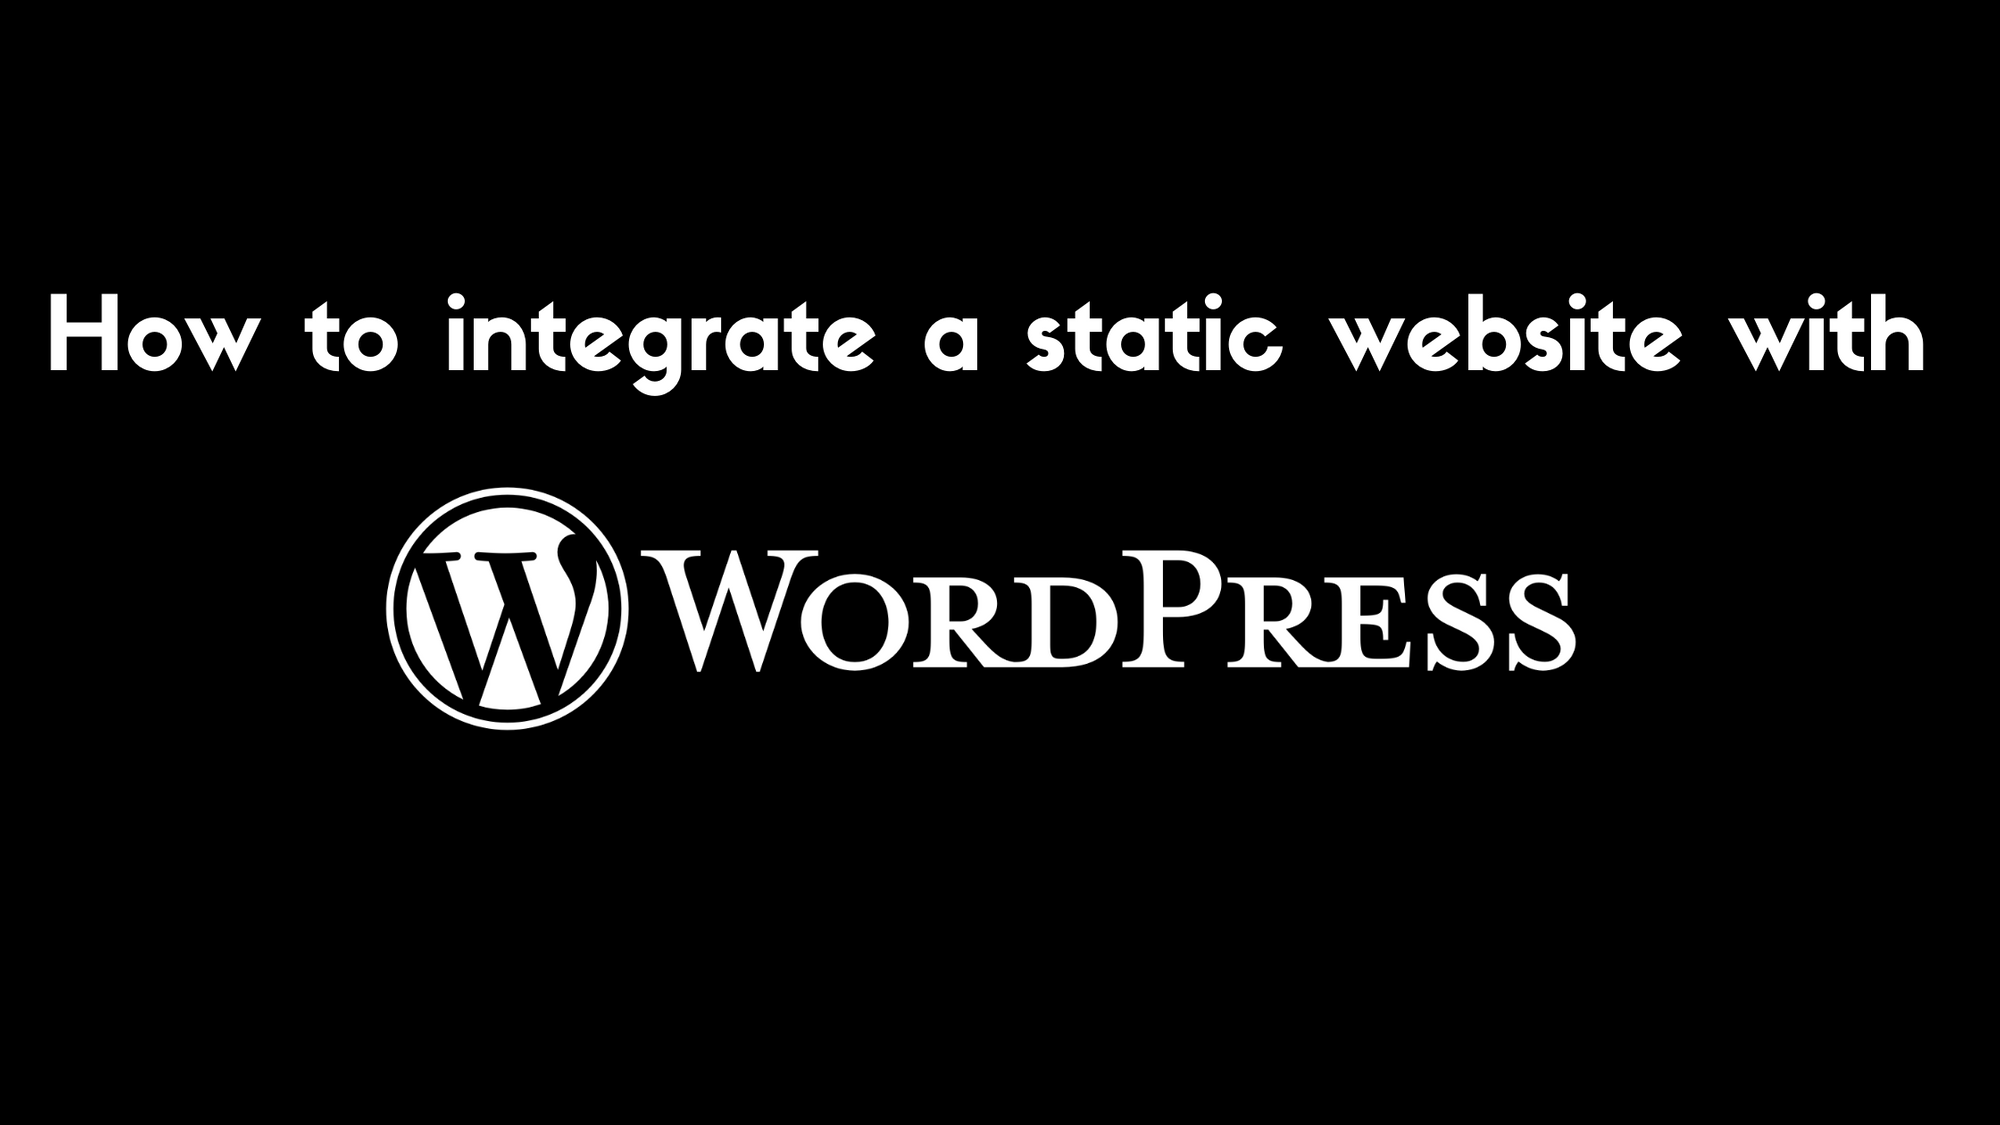 How to Integrate a Static Website with WordPress